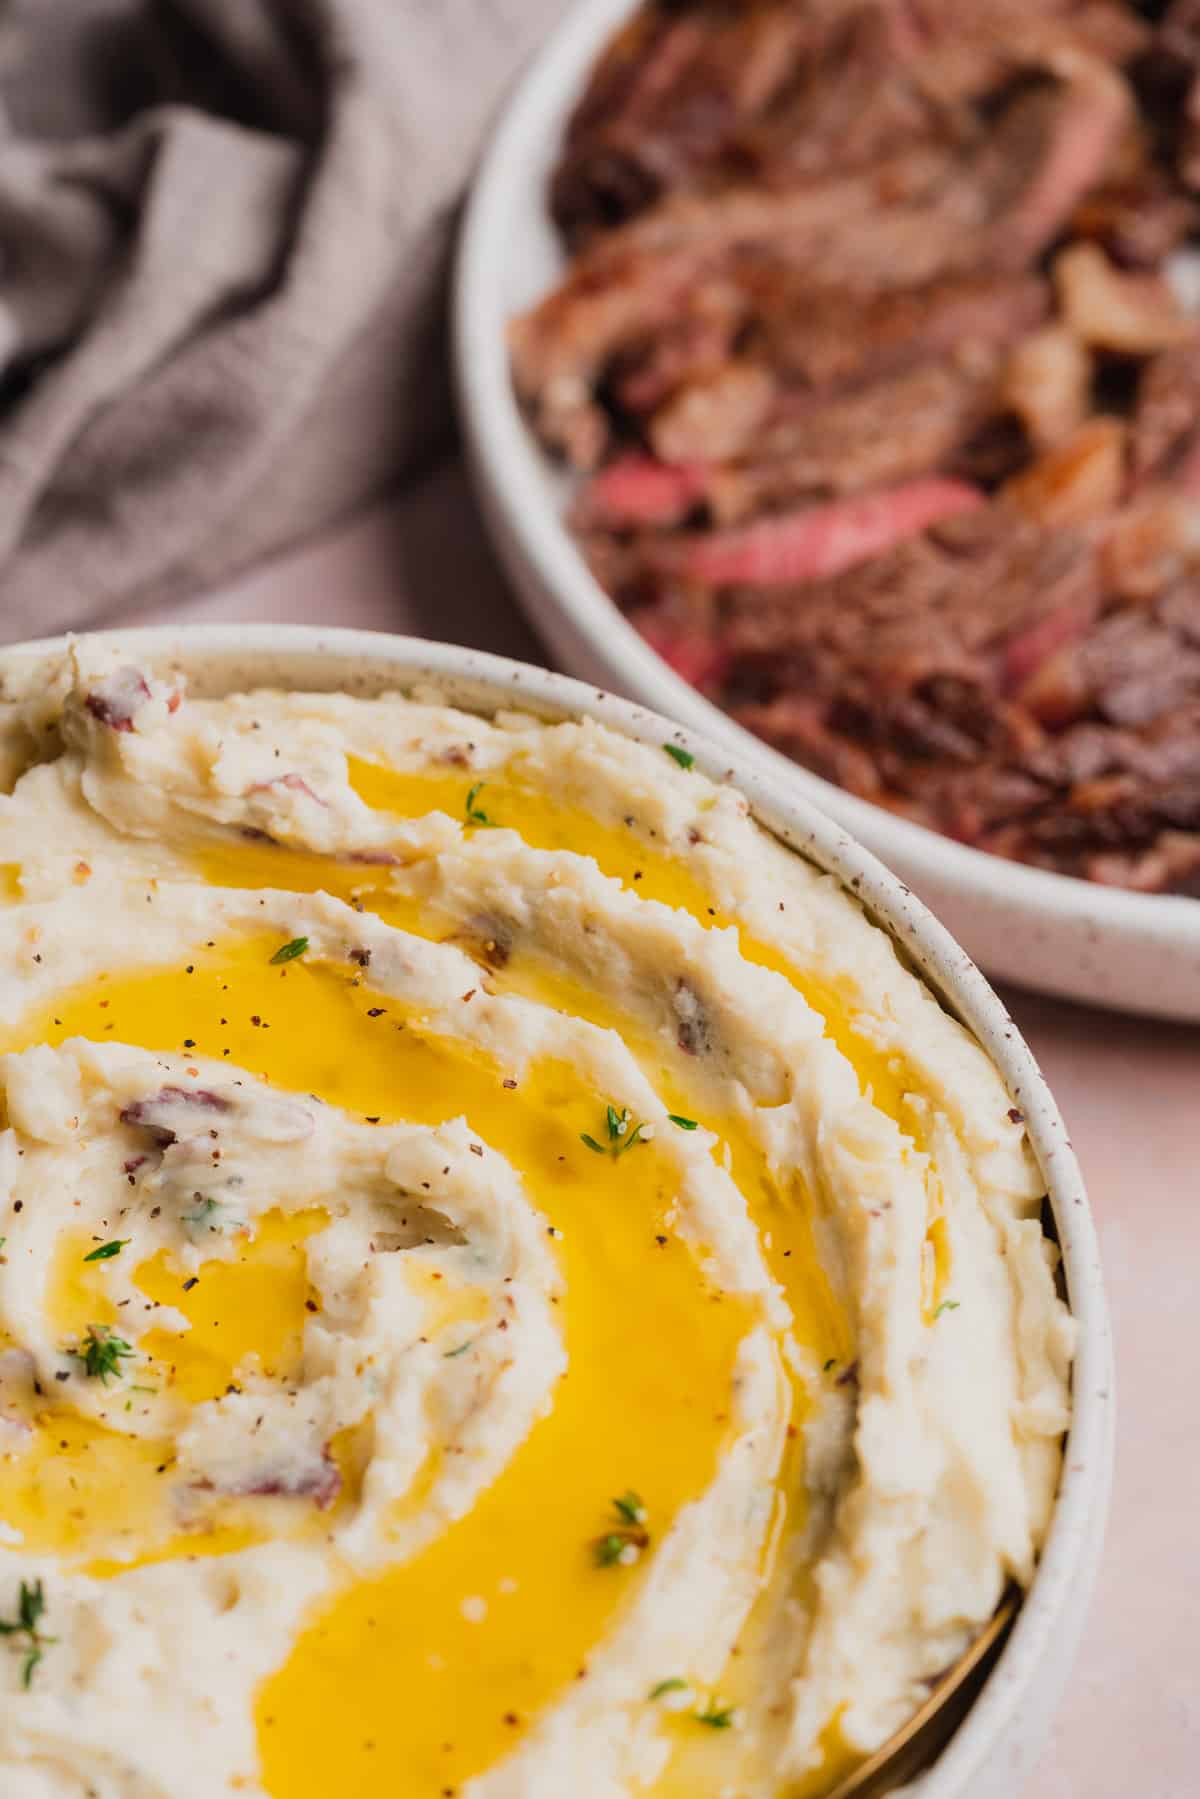 45 degree shot of a bowl of creamy mashed potatoes topped with melted butter, fresh thyme, black pepper, and steak